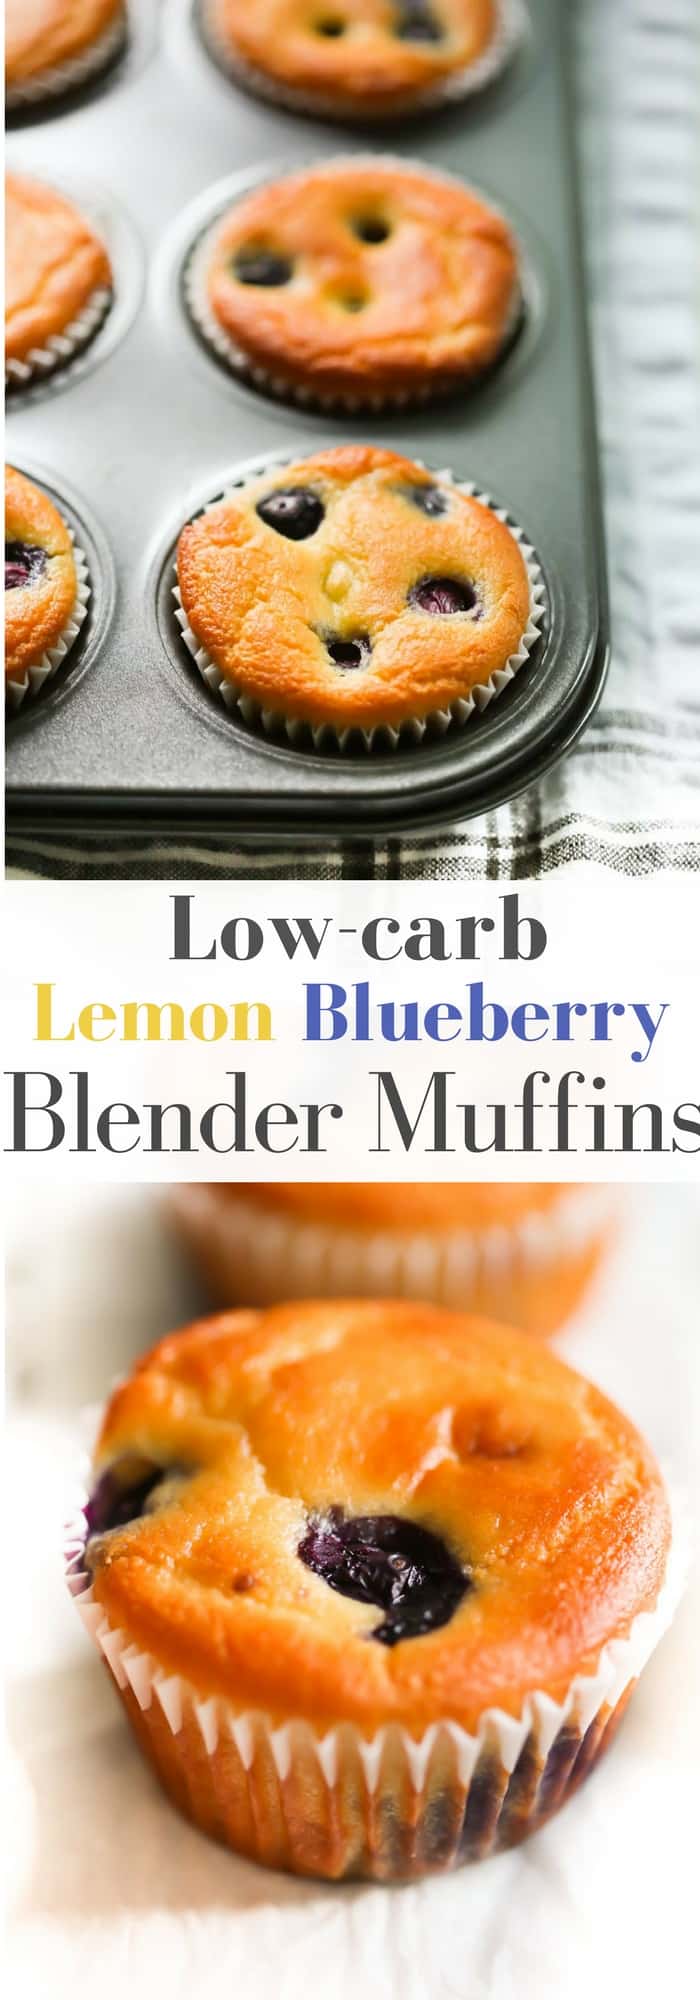 Low-carb Lemon Blueberry Blender Muffins - These Low-carb Lemon Blueberry Blender Muffins are easy, healthy, gluten-free and just 136 calories each!